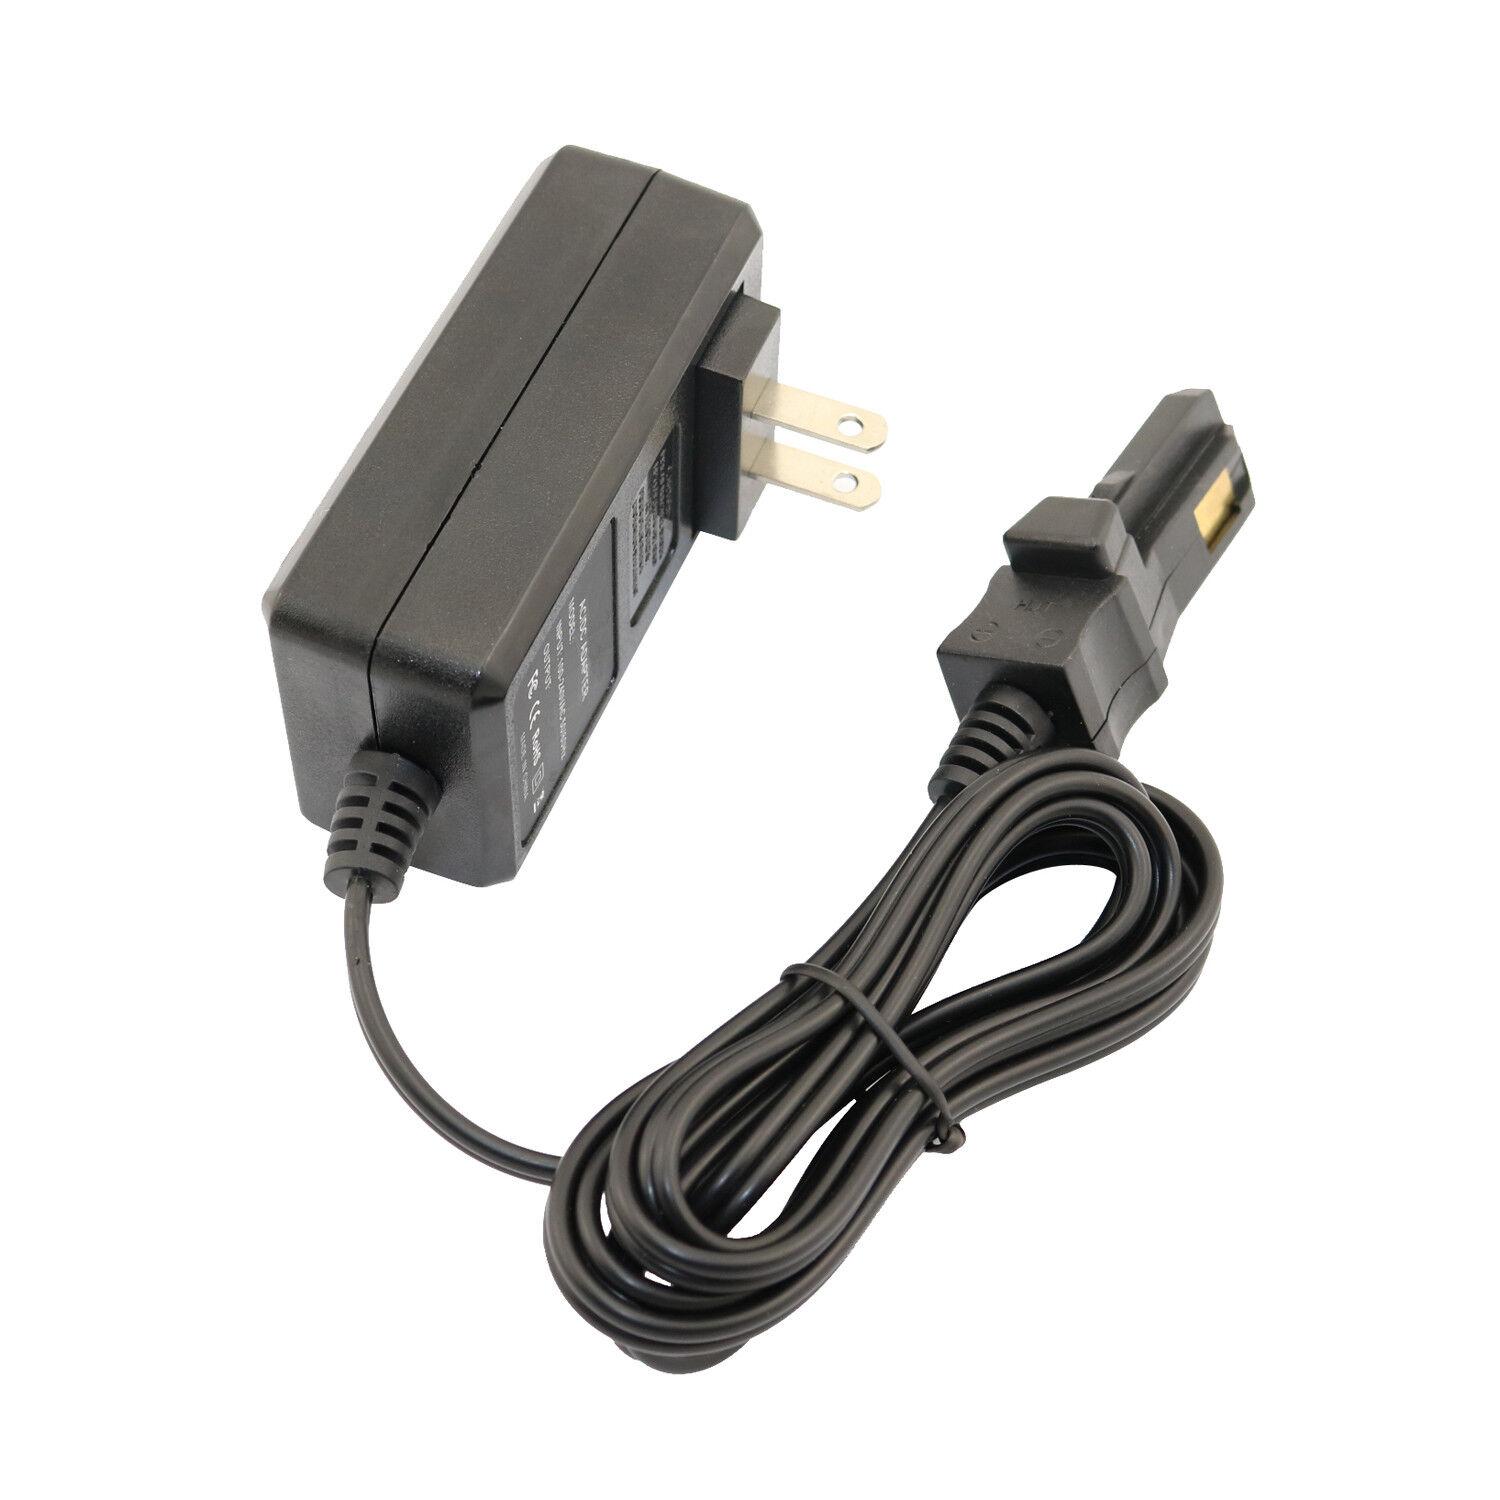 AC/DC Adapter Charger for Power Wheels P8812 Barbie Mustang Charger AC/DC Adapter Charger for Power Wheels P8812 Barbie